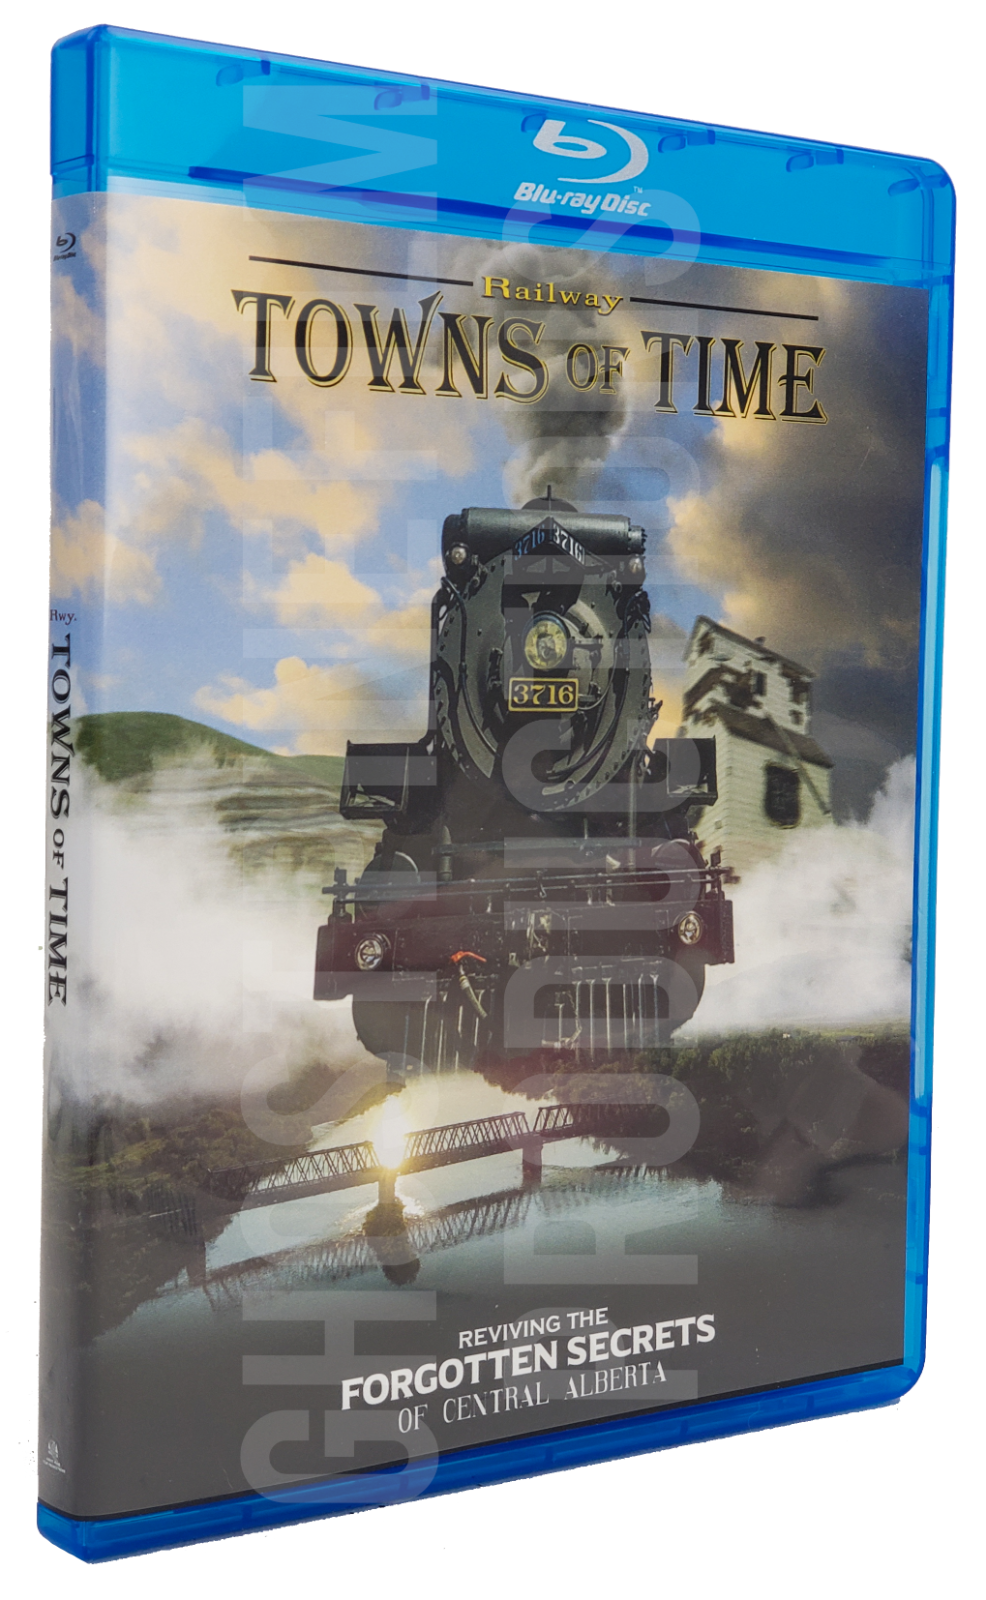 Canadian Pacific "Railway Towns of Time"-Ghost Pine Films Production Blu-Ray DVD Без бренда GPF-10-0001 - фотография #10